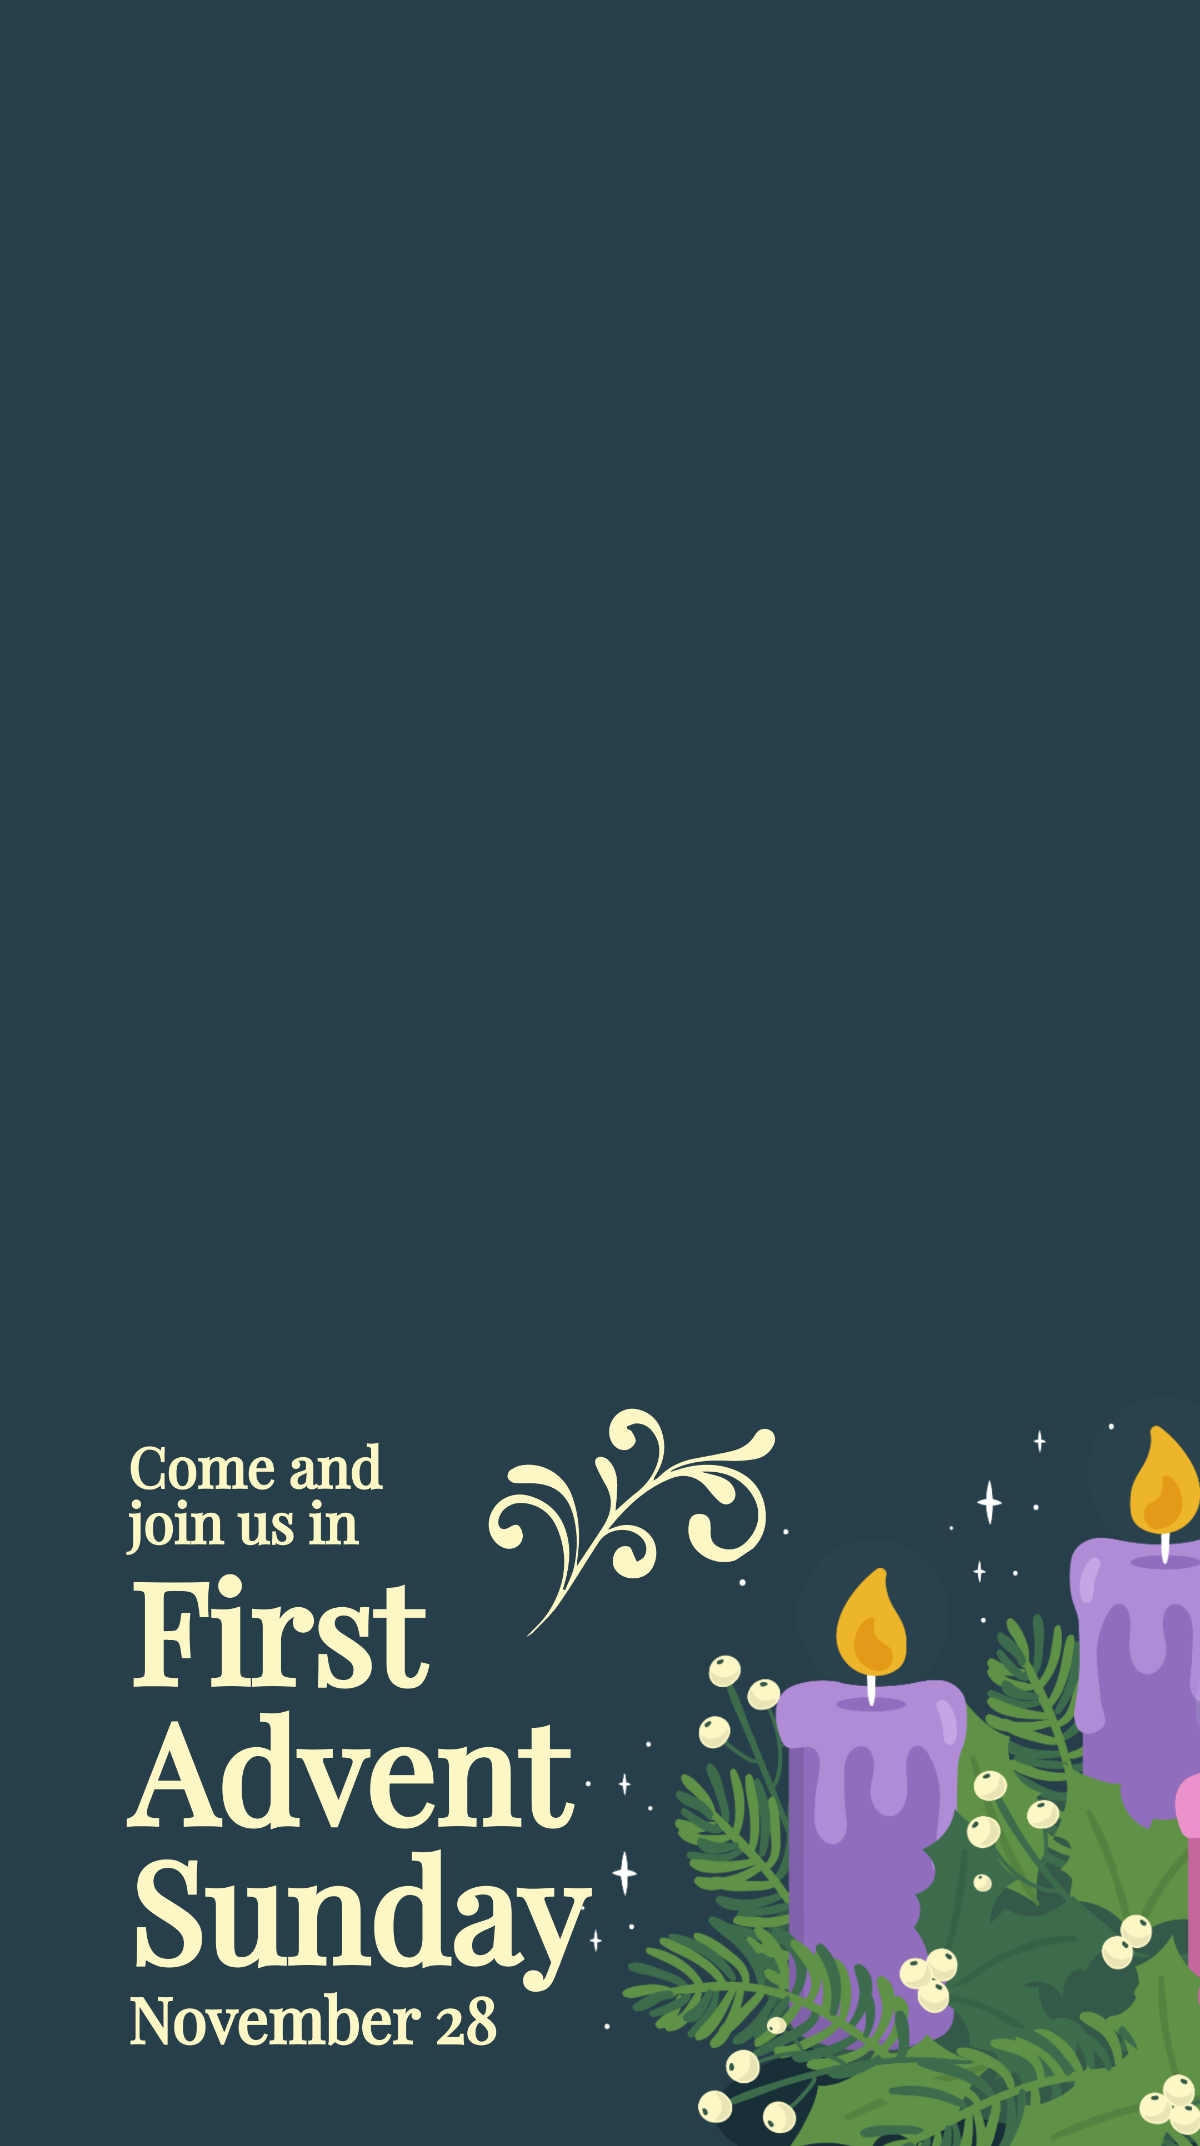 First Advent Sunday Snapchat Geofilter Template